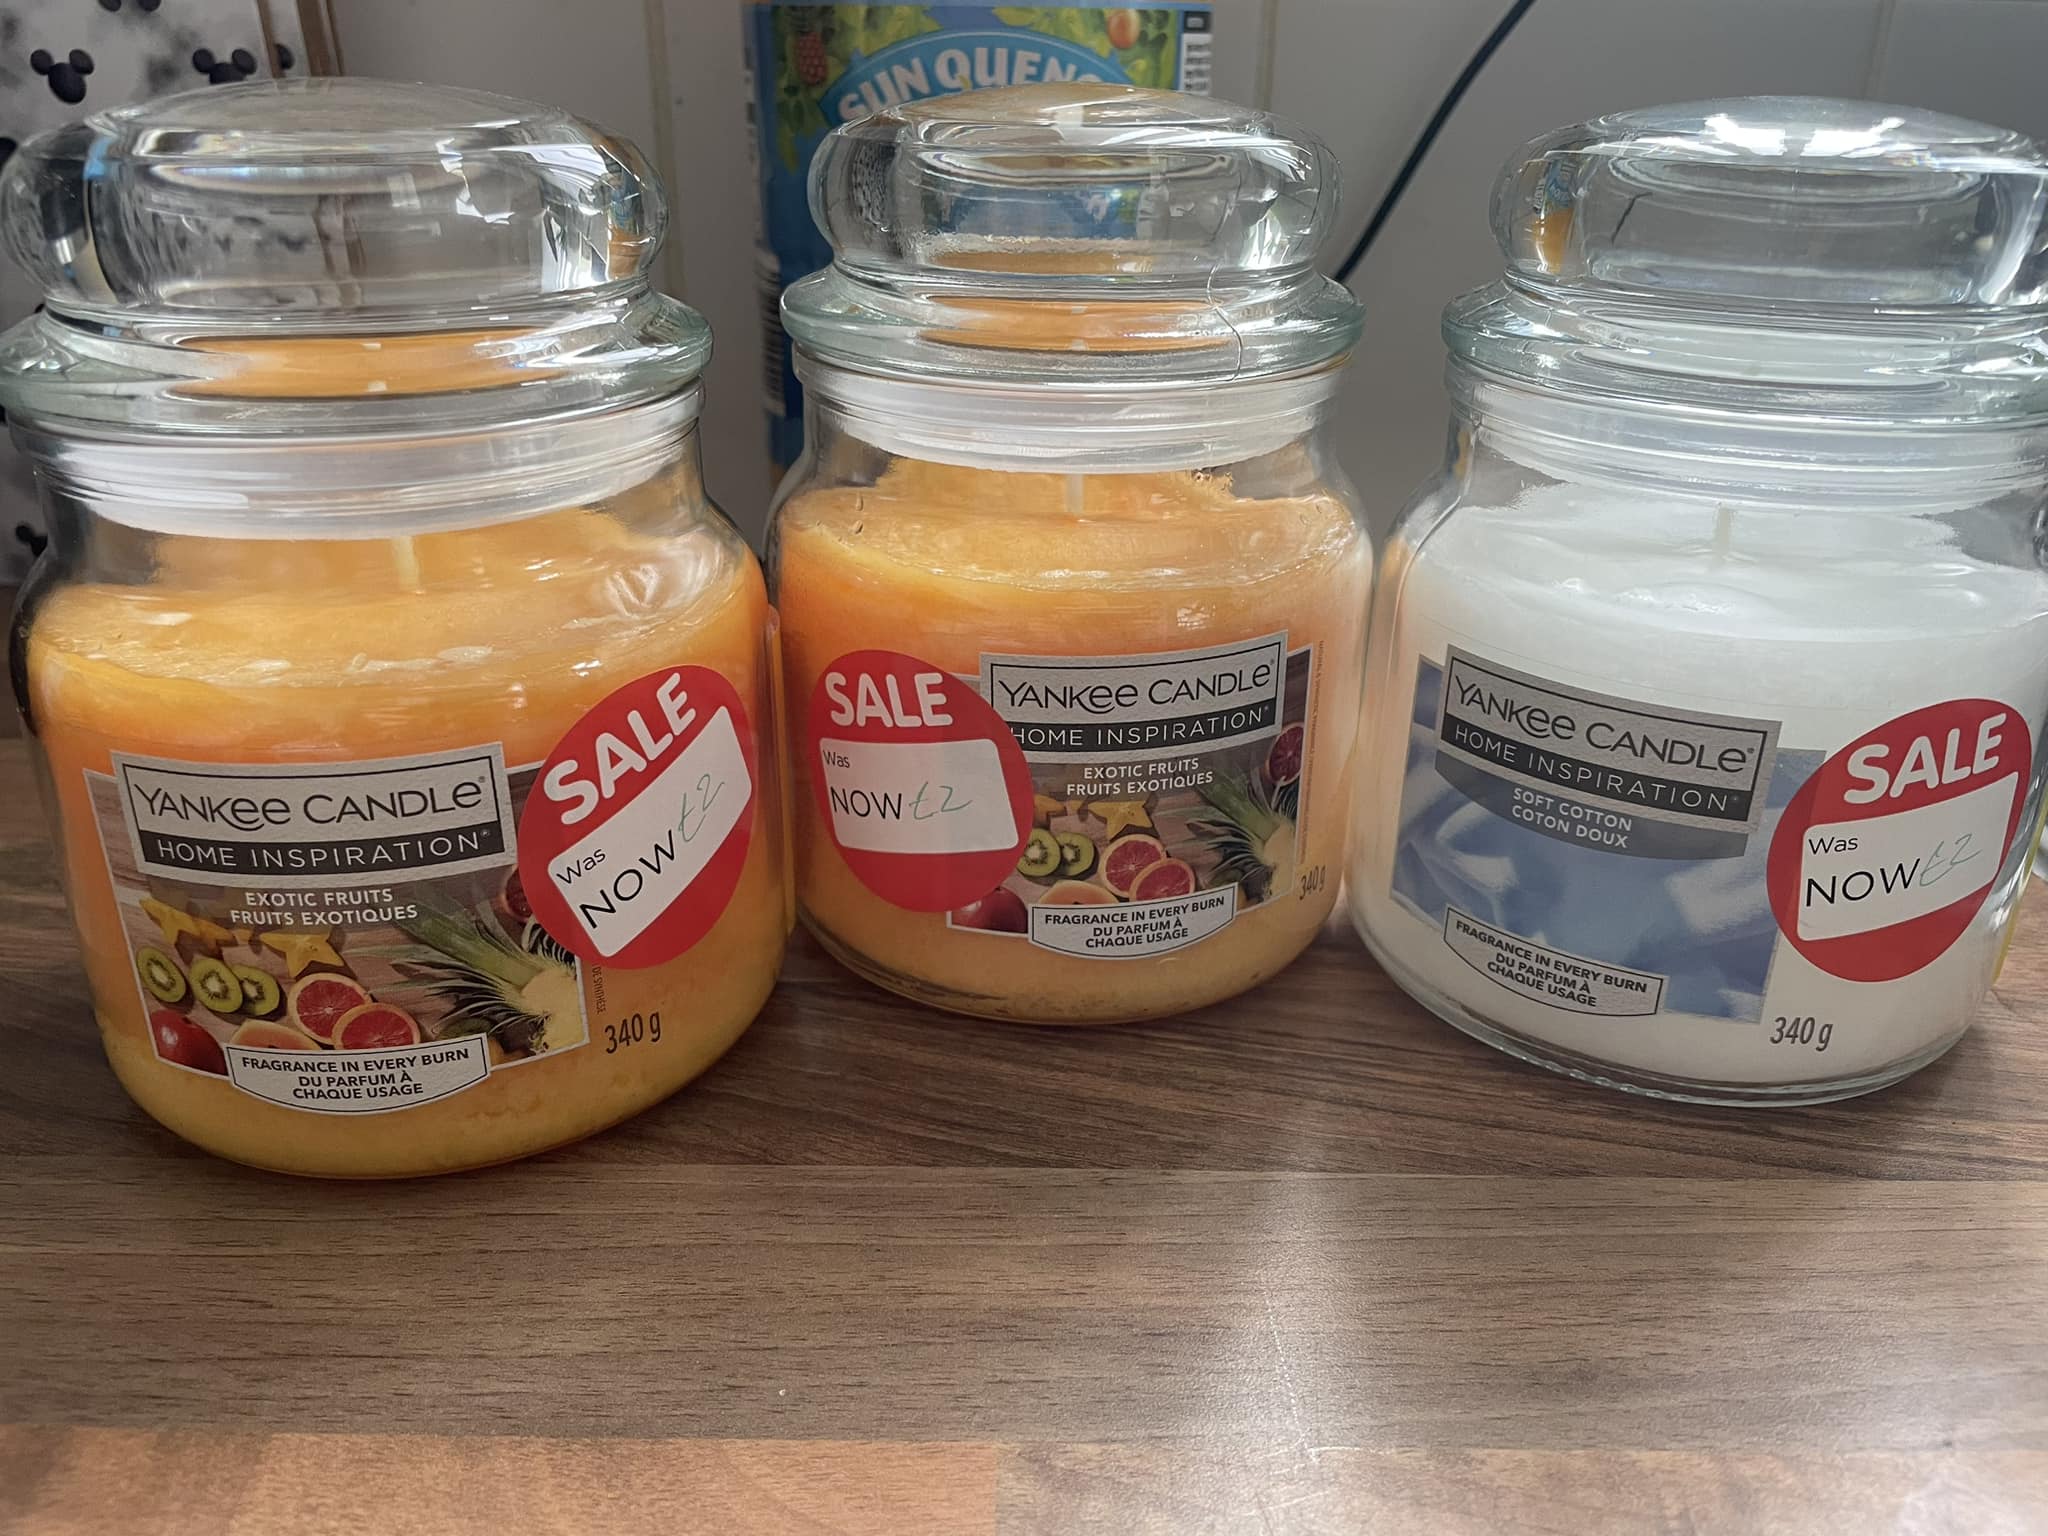 Asda shoppers run to grab Yankee candles which are scanning at a bargain £2 – and Soft Cotton is among those on sale